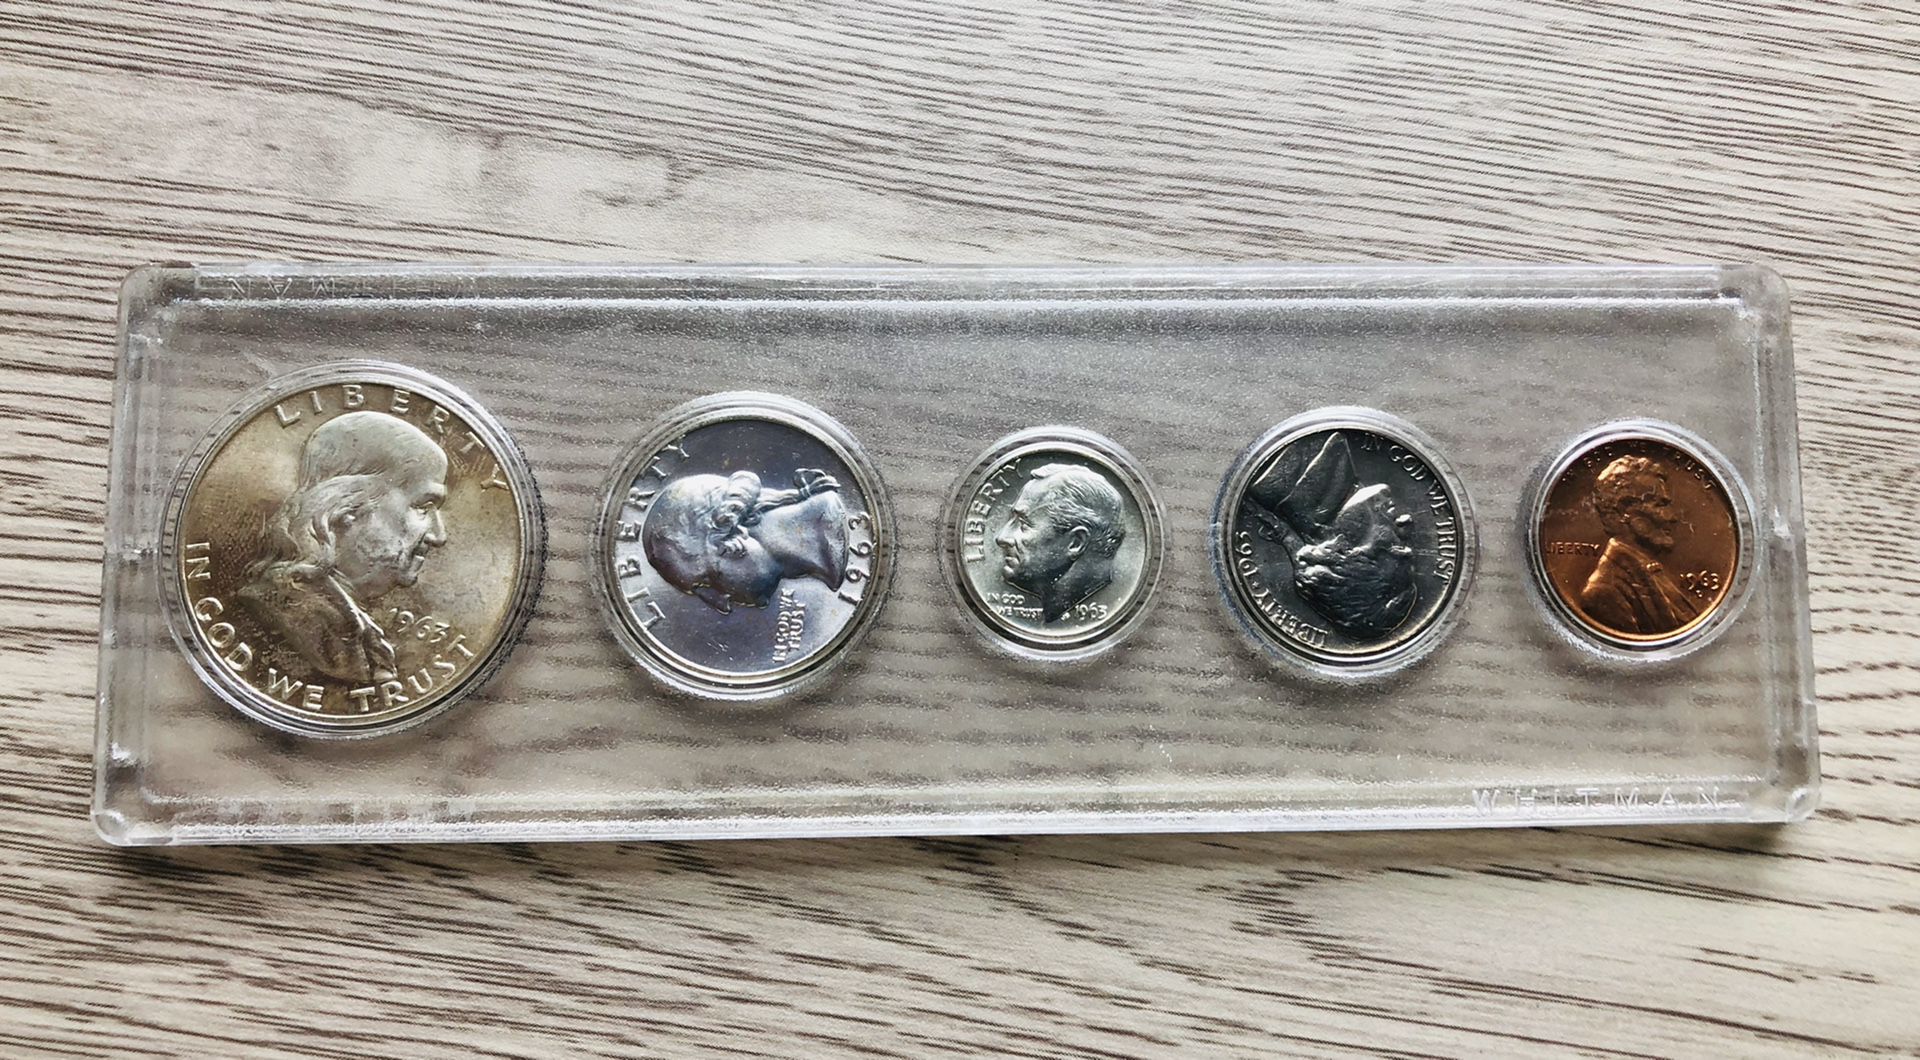 1963 US Mint Silver 5 coin set